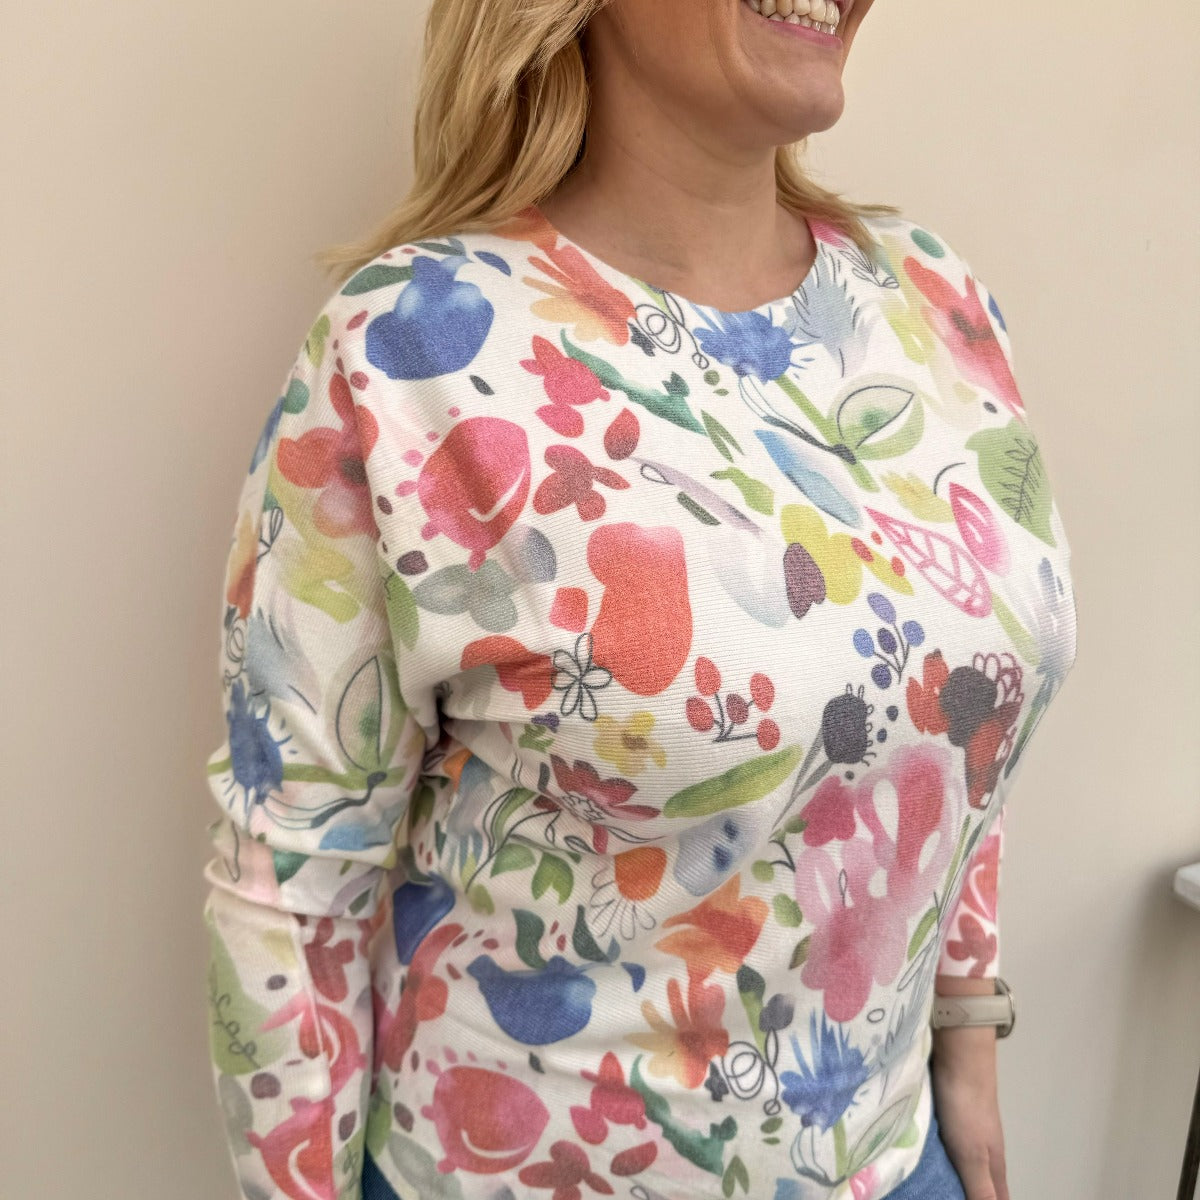 Paramour bright floral jumper